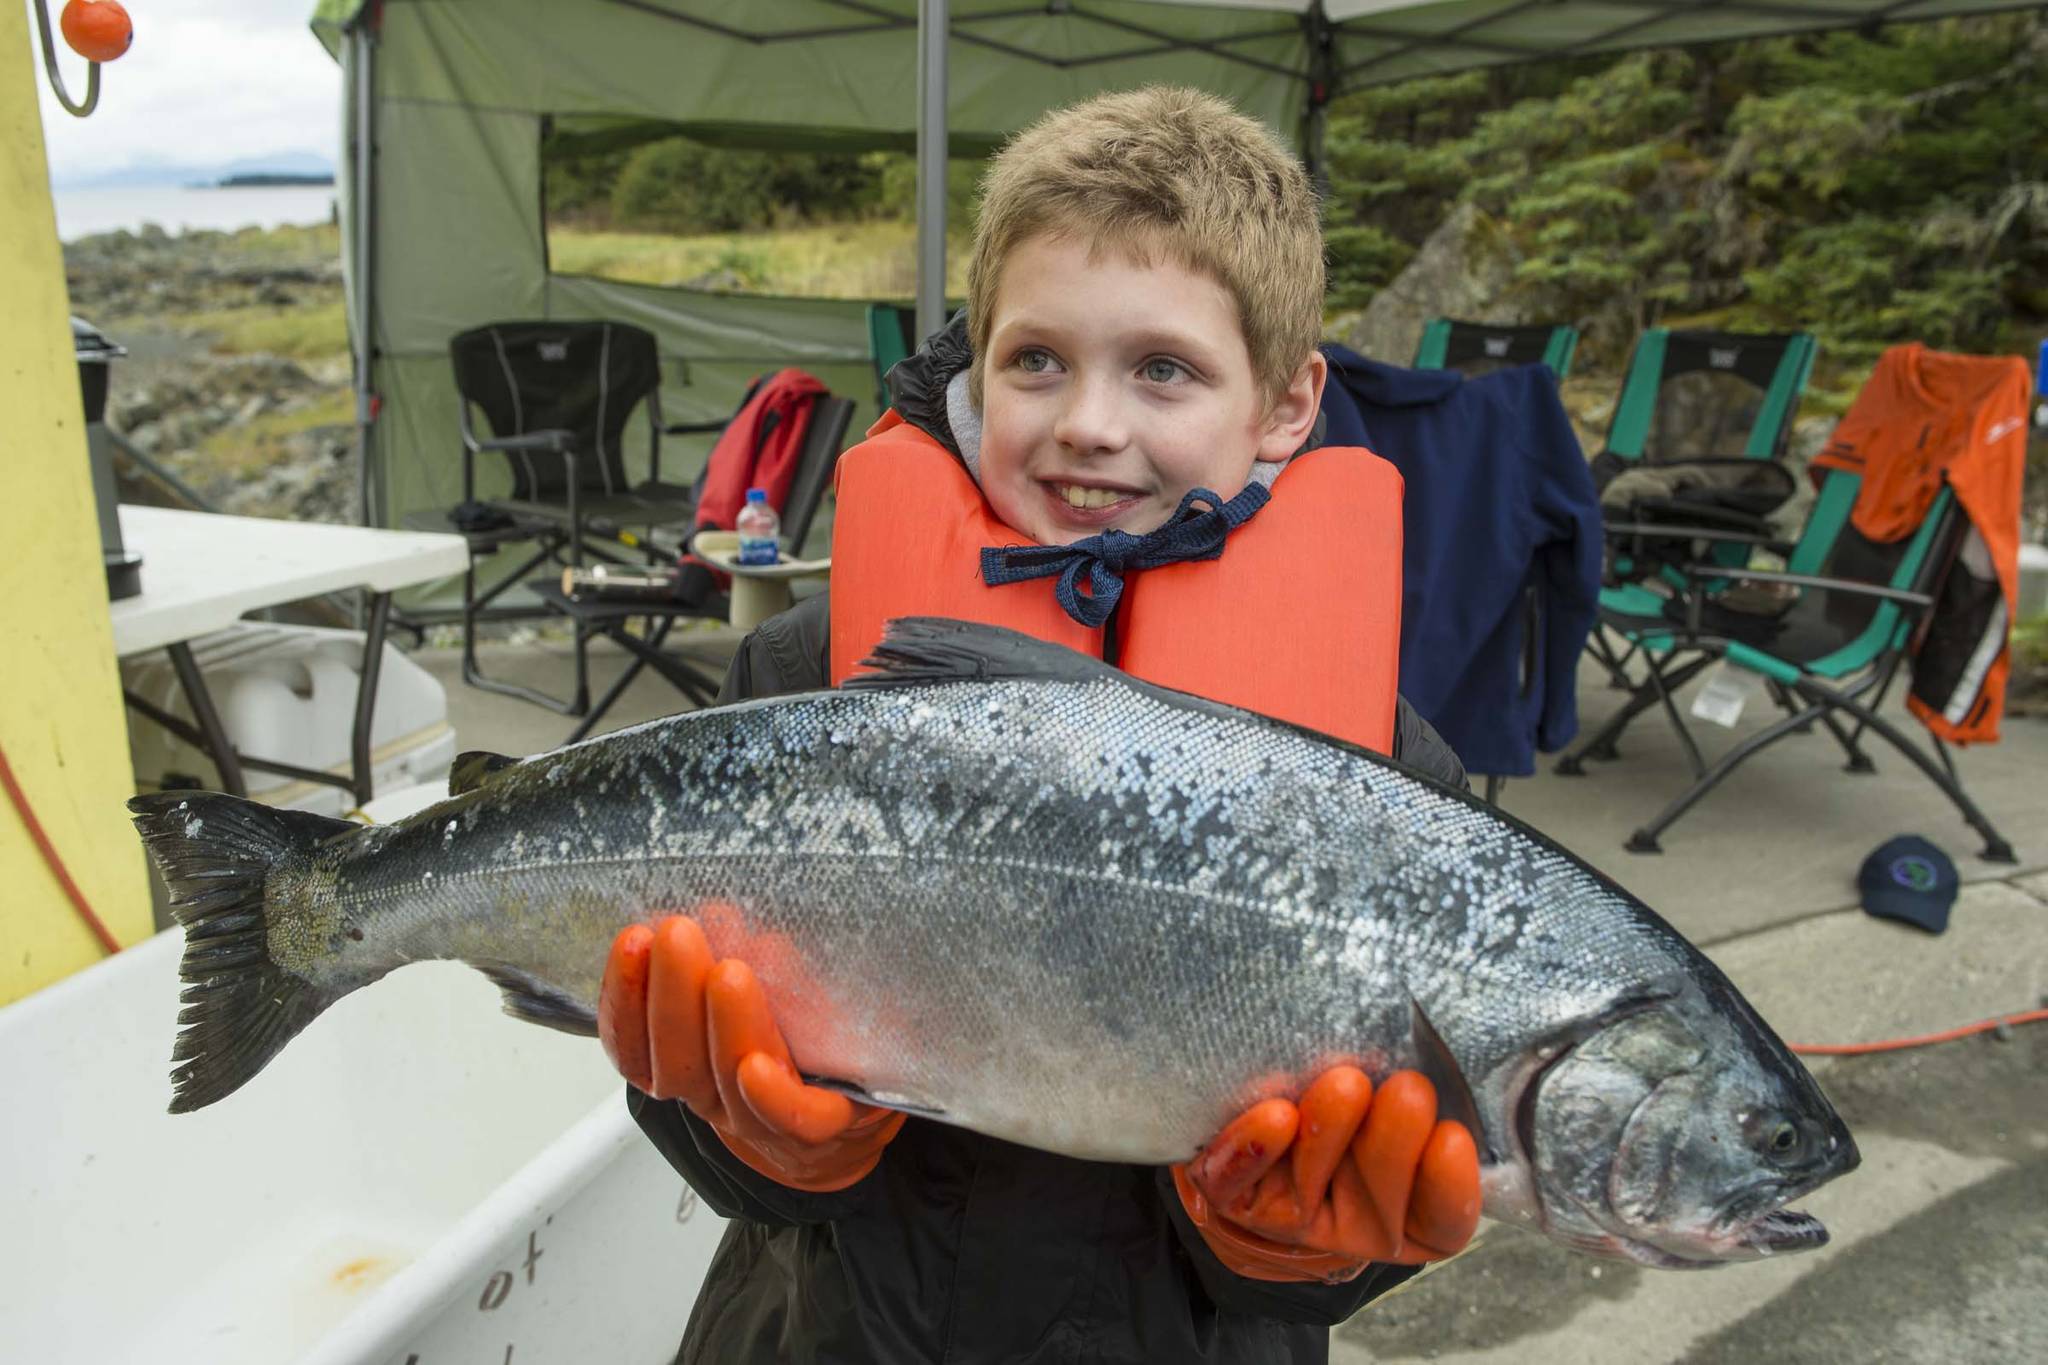 Tito Ritter, 9, holds an 8.5 pound coho he turned in at the Golden North Salmon Derby’s station at Amalga Harbor on Saturday, Aug. 24, 2019. (Michael Penn | Juneau Empire)